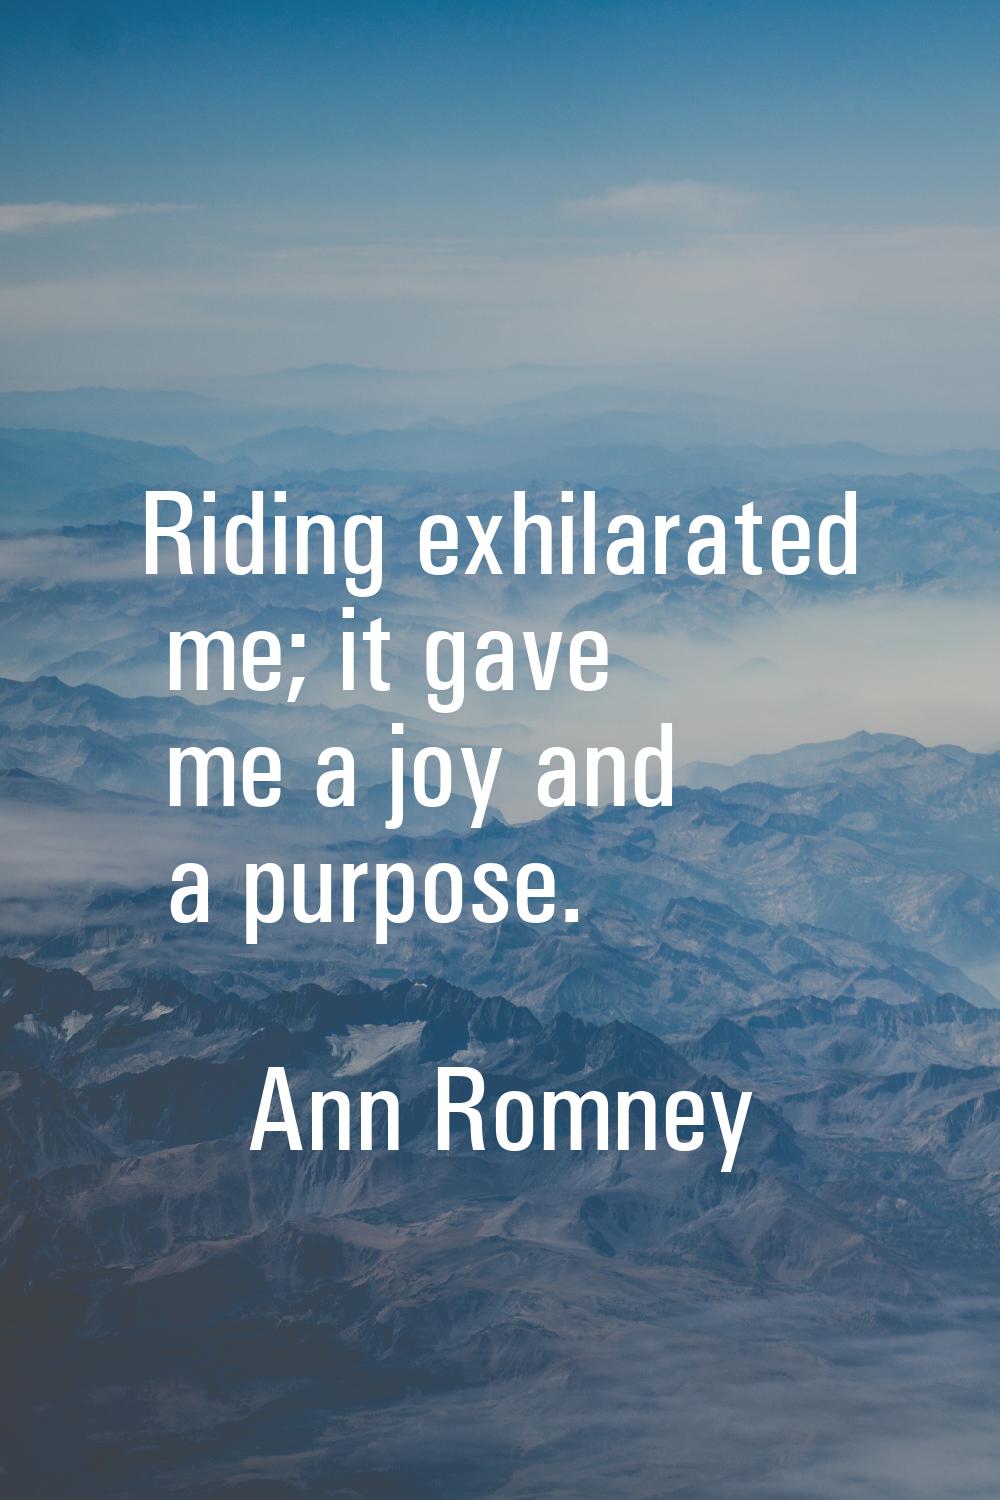 Riding exhilarated me; it gave me a joy and a purpose.